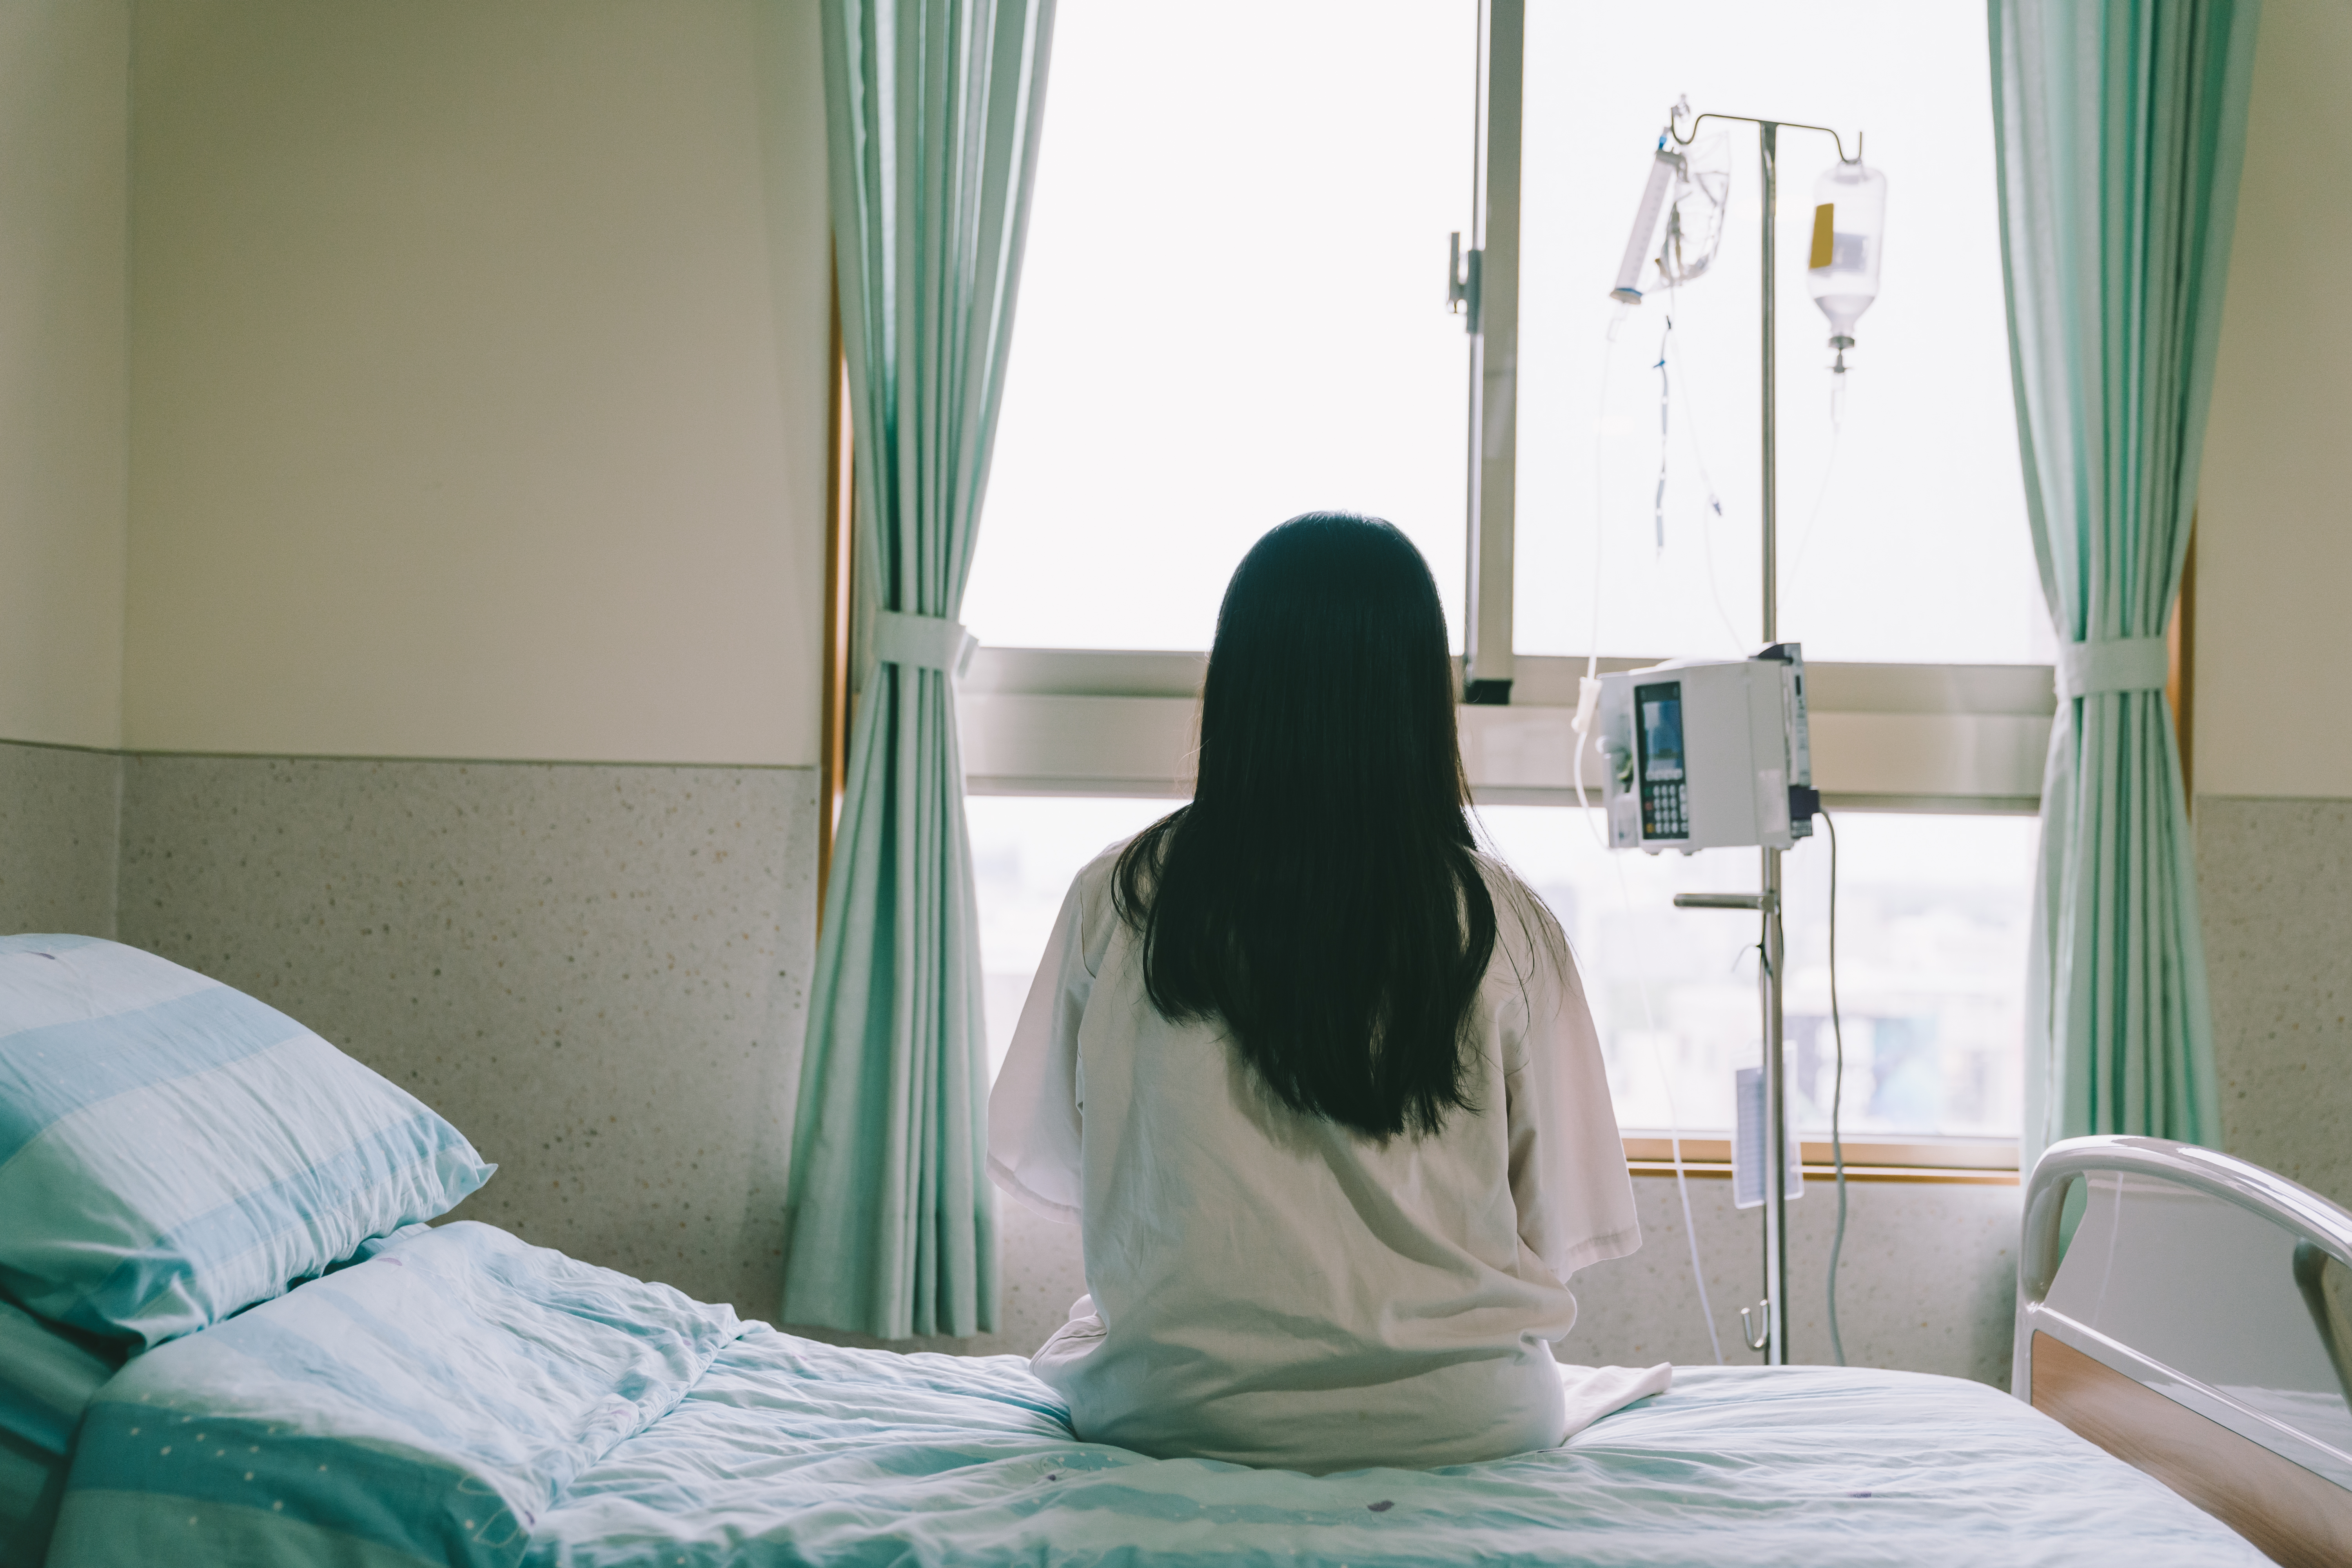 A person in the hospital | Source: Shutterstock